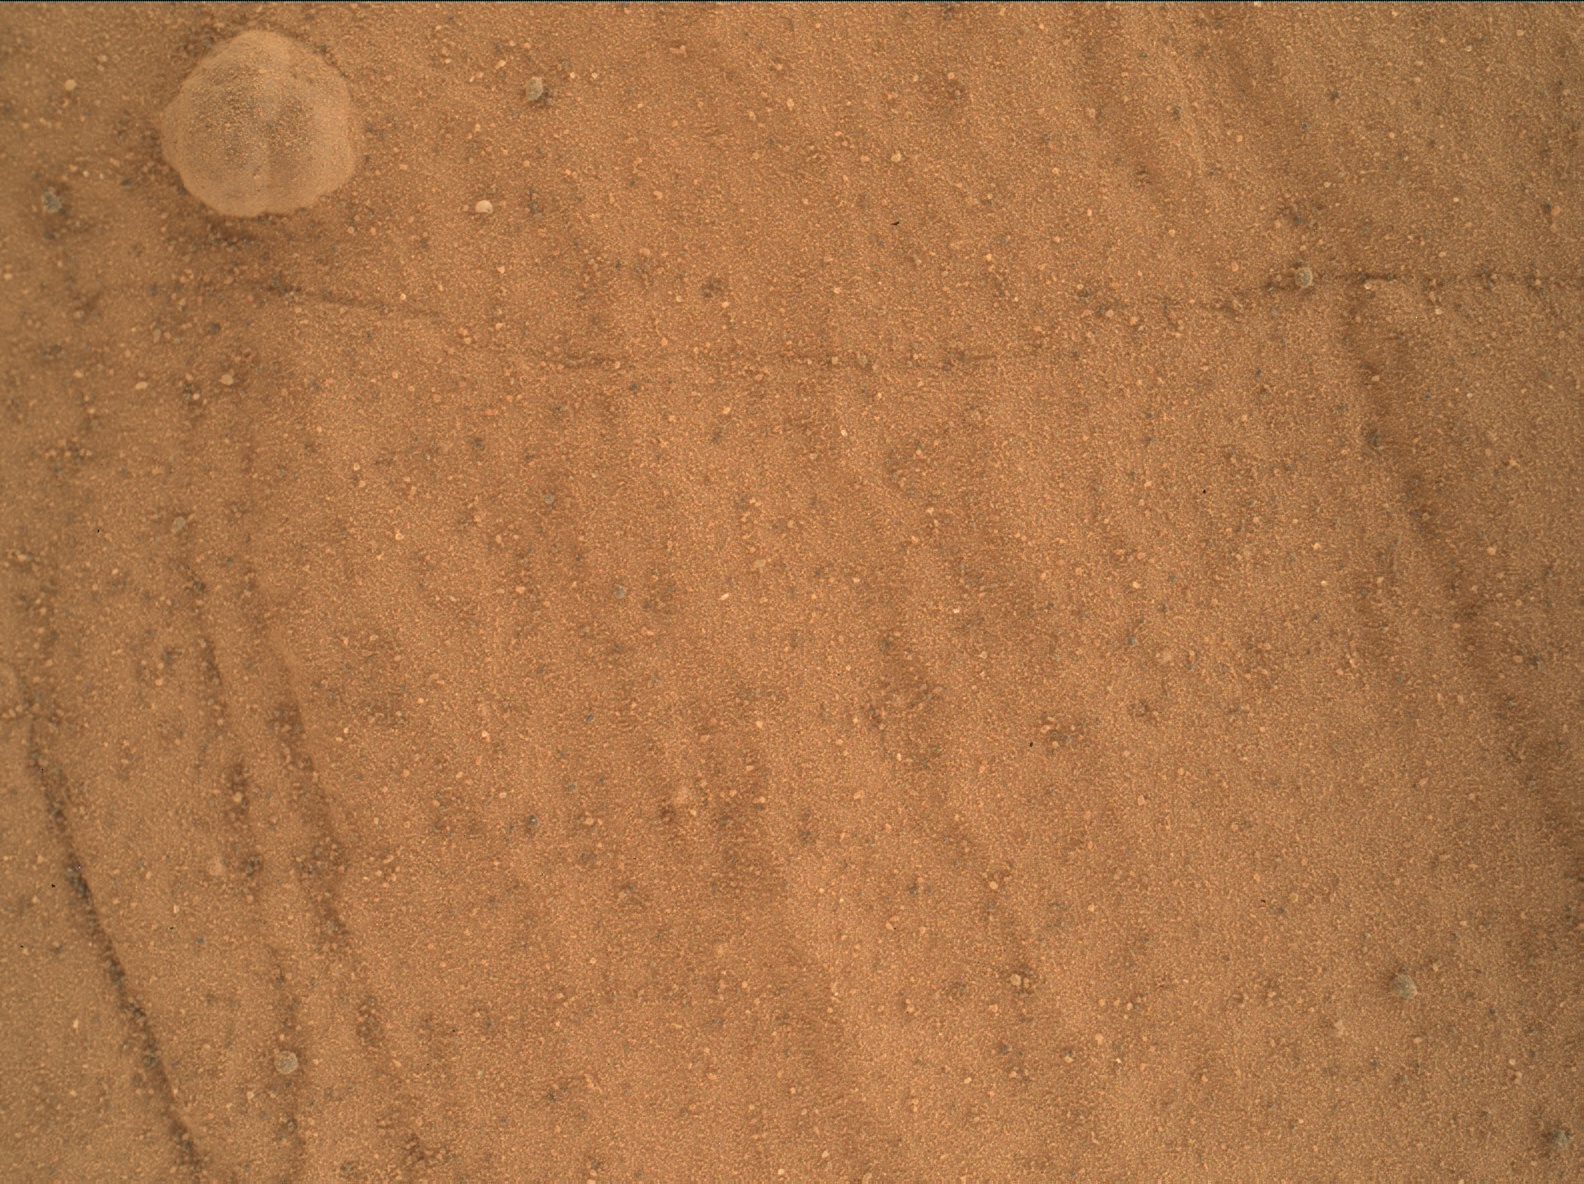 Nasa's Mars rover Curiosity acquired this image using its Mars Hand Lens Imager (MAHLI) on Sol 1753